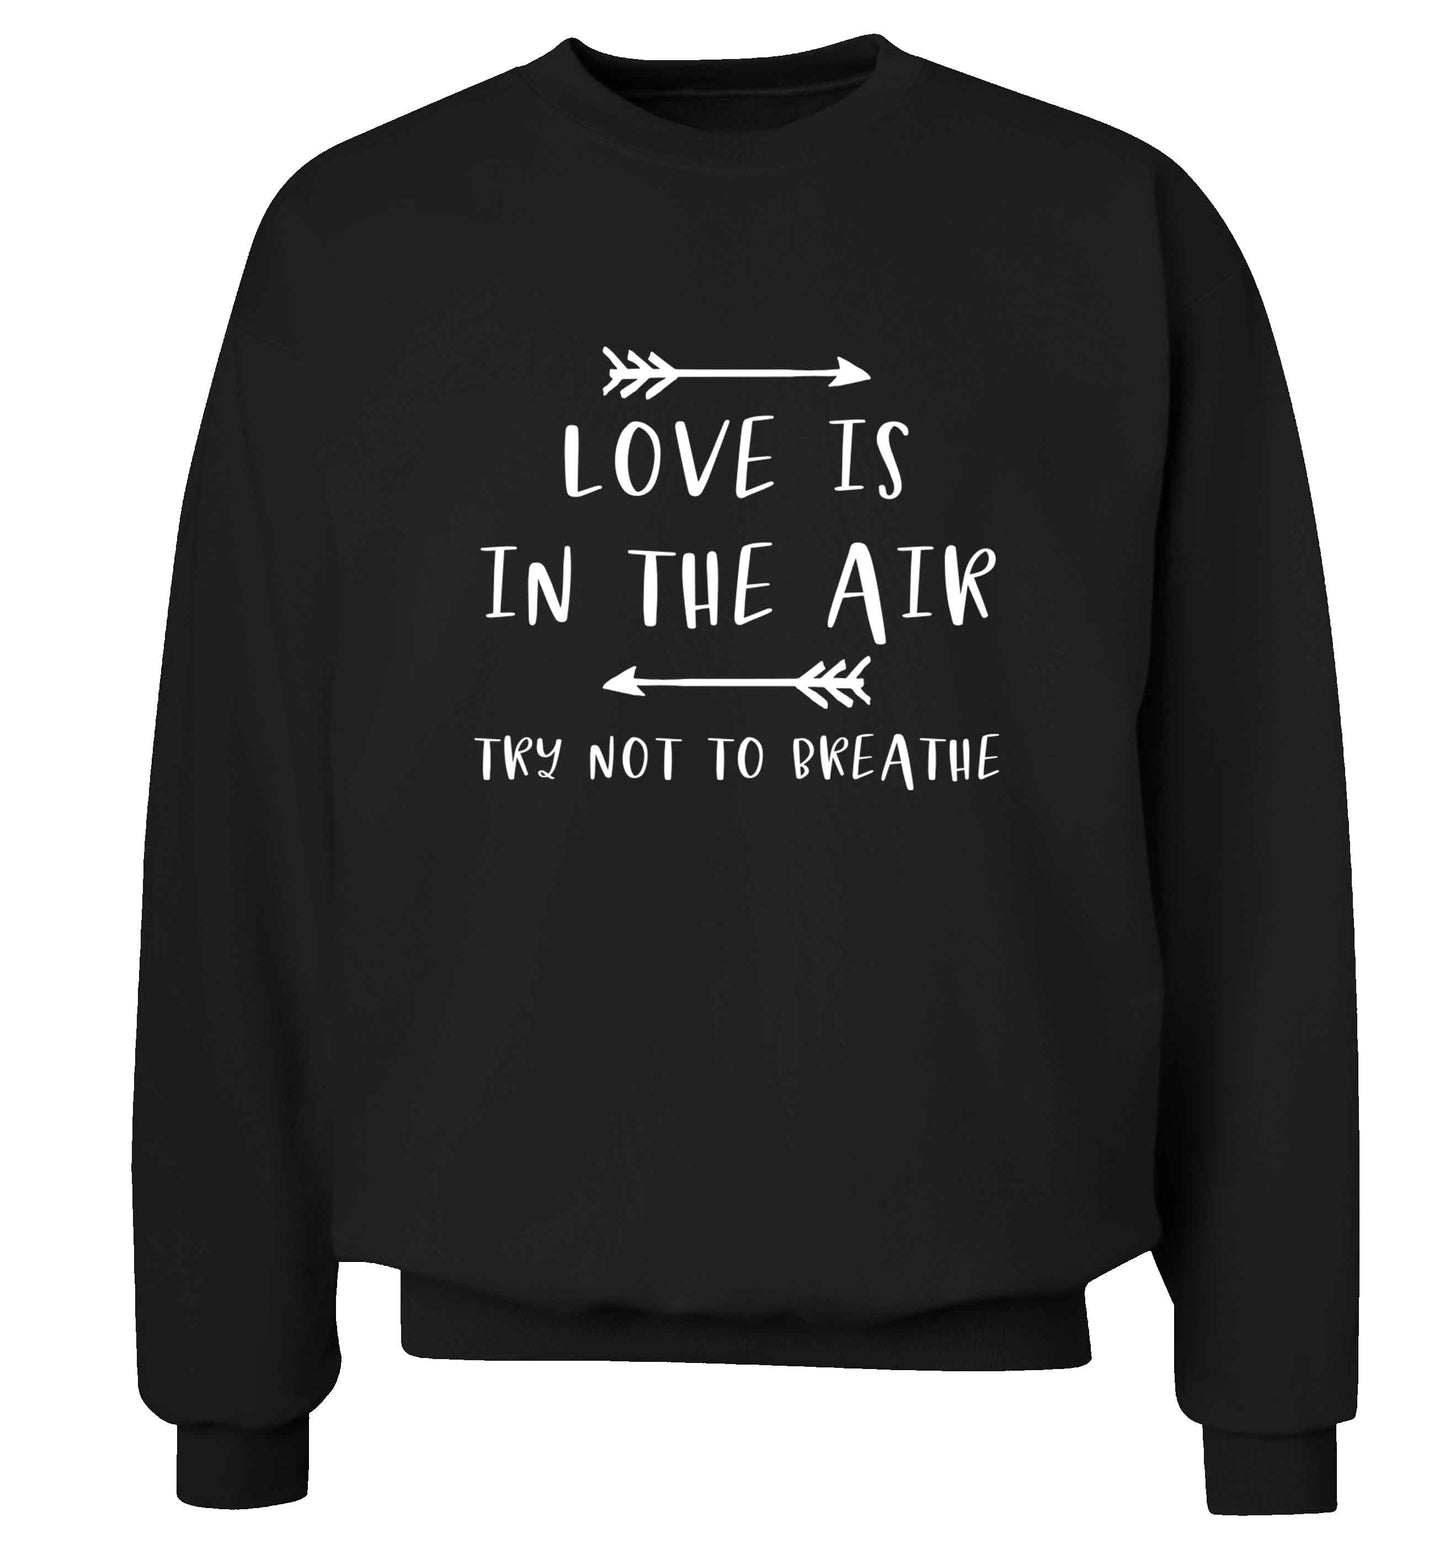 Love is in the air try not to breathe adult's unisex black sweater 2XL